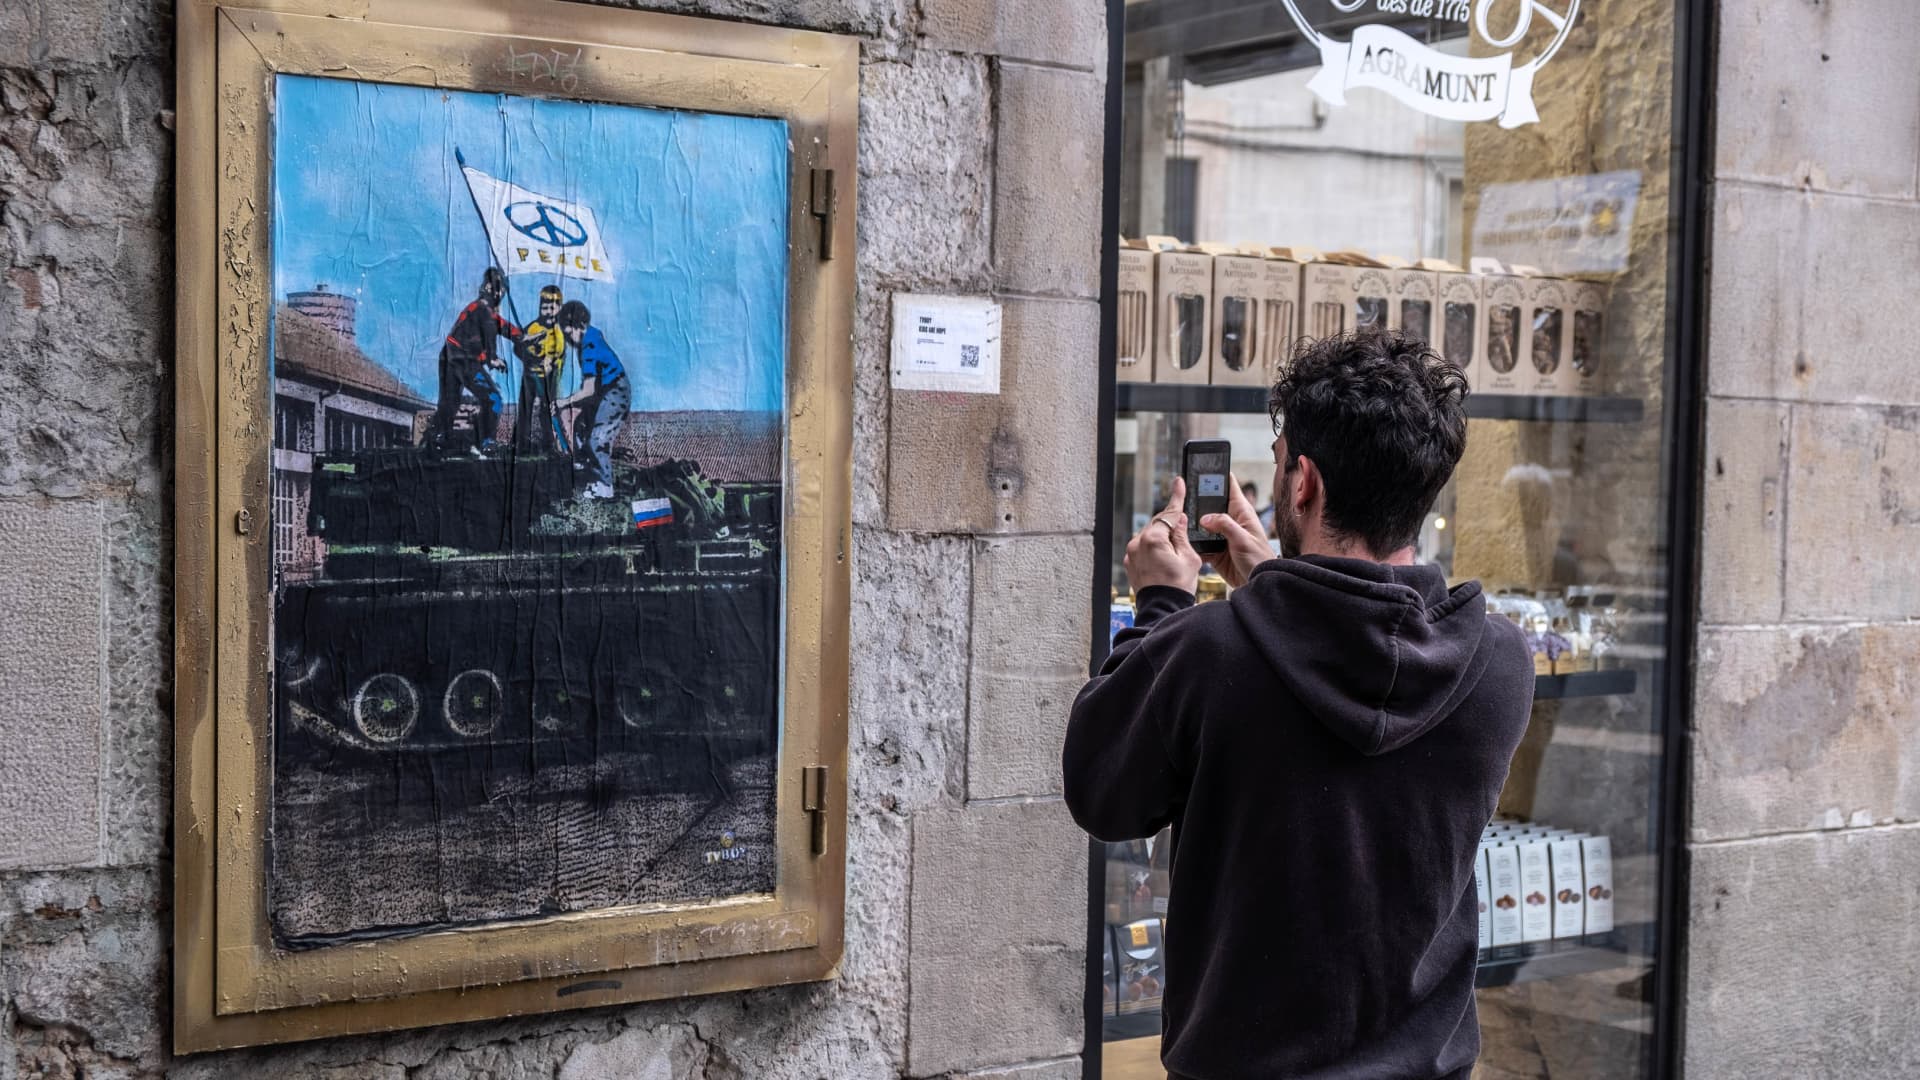 A passer-by is seen taking photos of artist TvBoy's new collage for peace in Ukraine. TvBoy, the Italian artist living in Barcelona, installs a new collage on the war in Ukraine in Plaza de Sant Jaume, representing three children installing a flag of peace on a Russian tank.